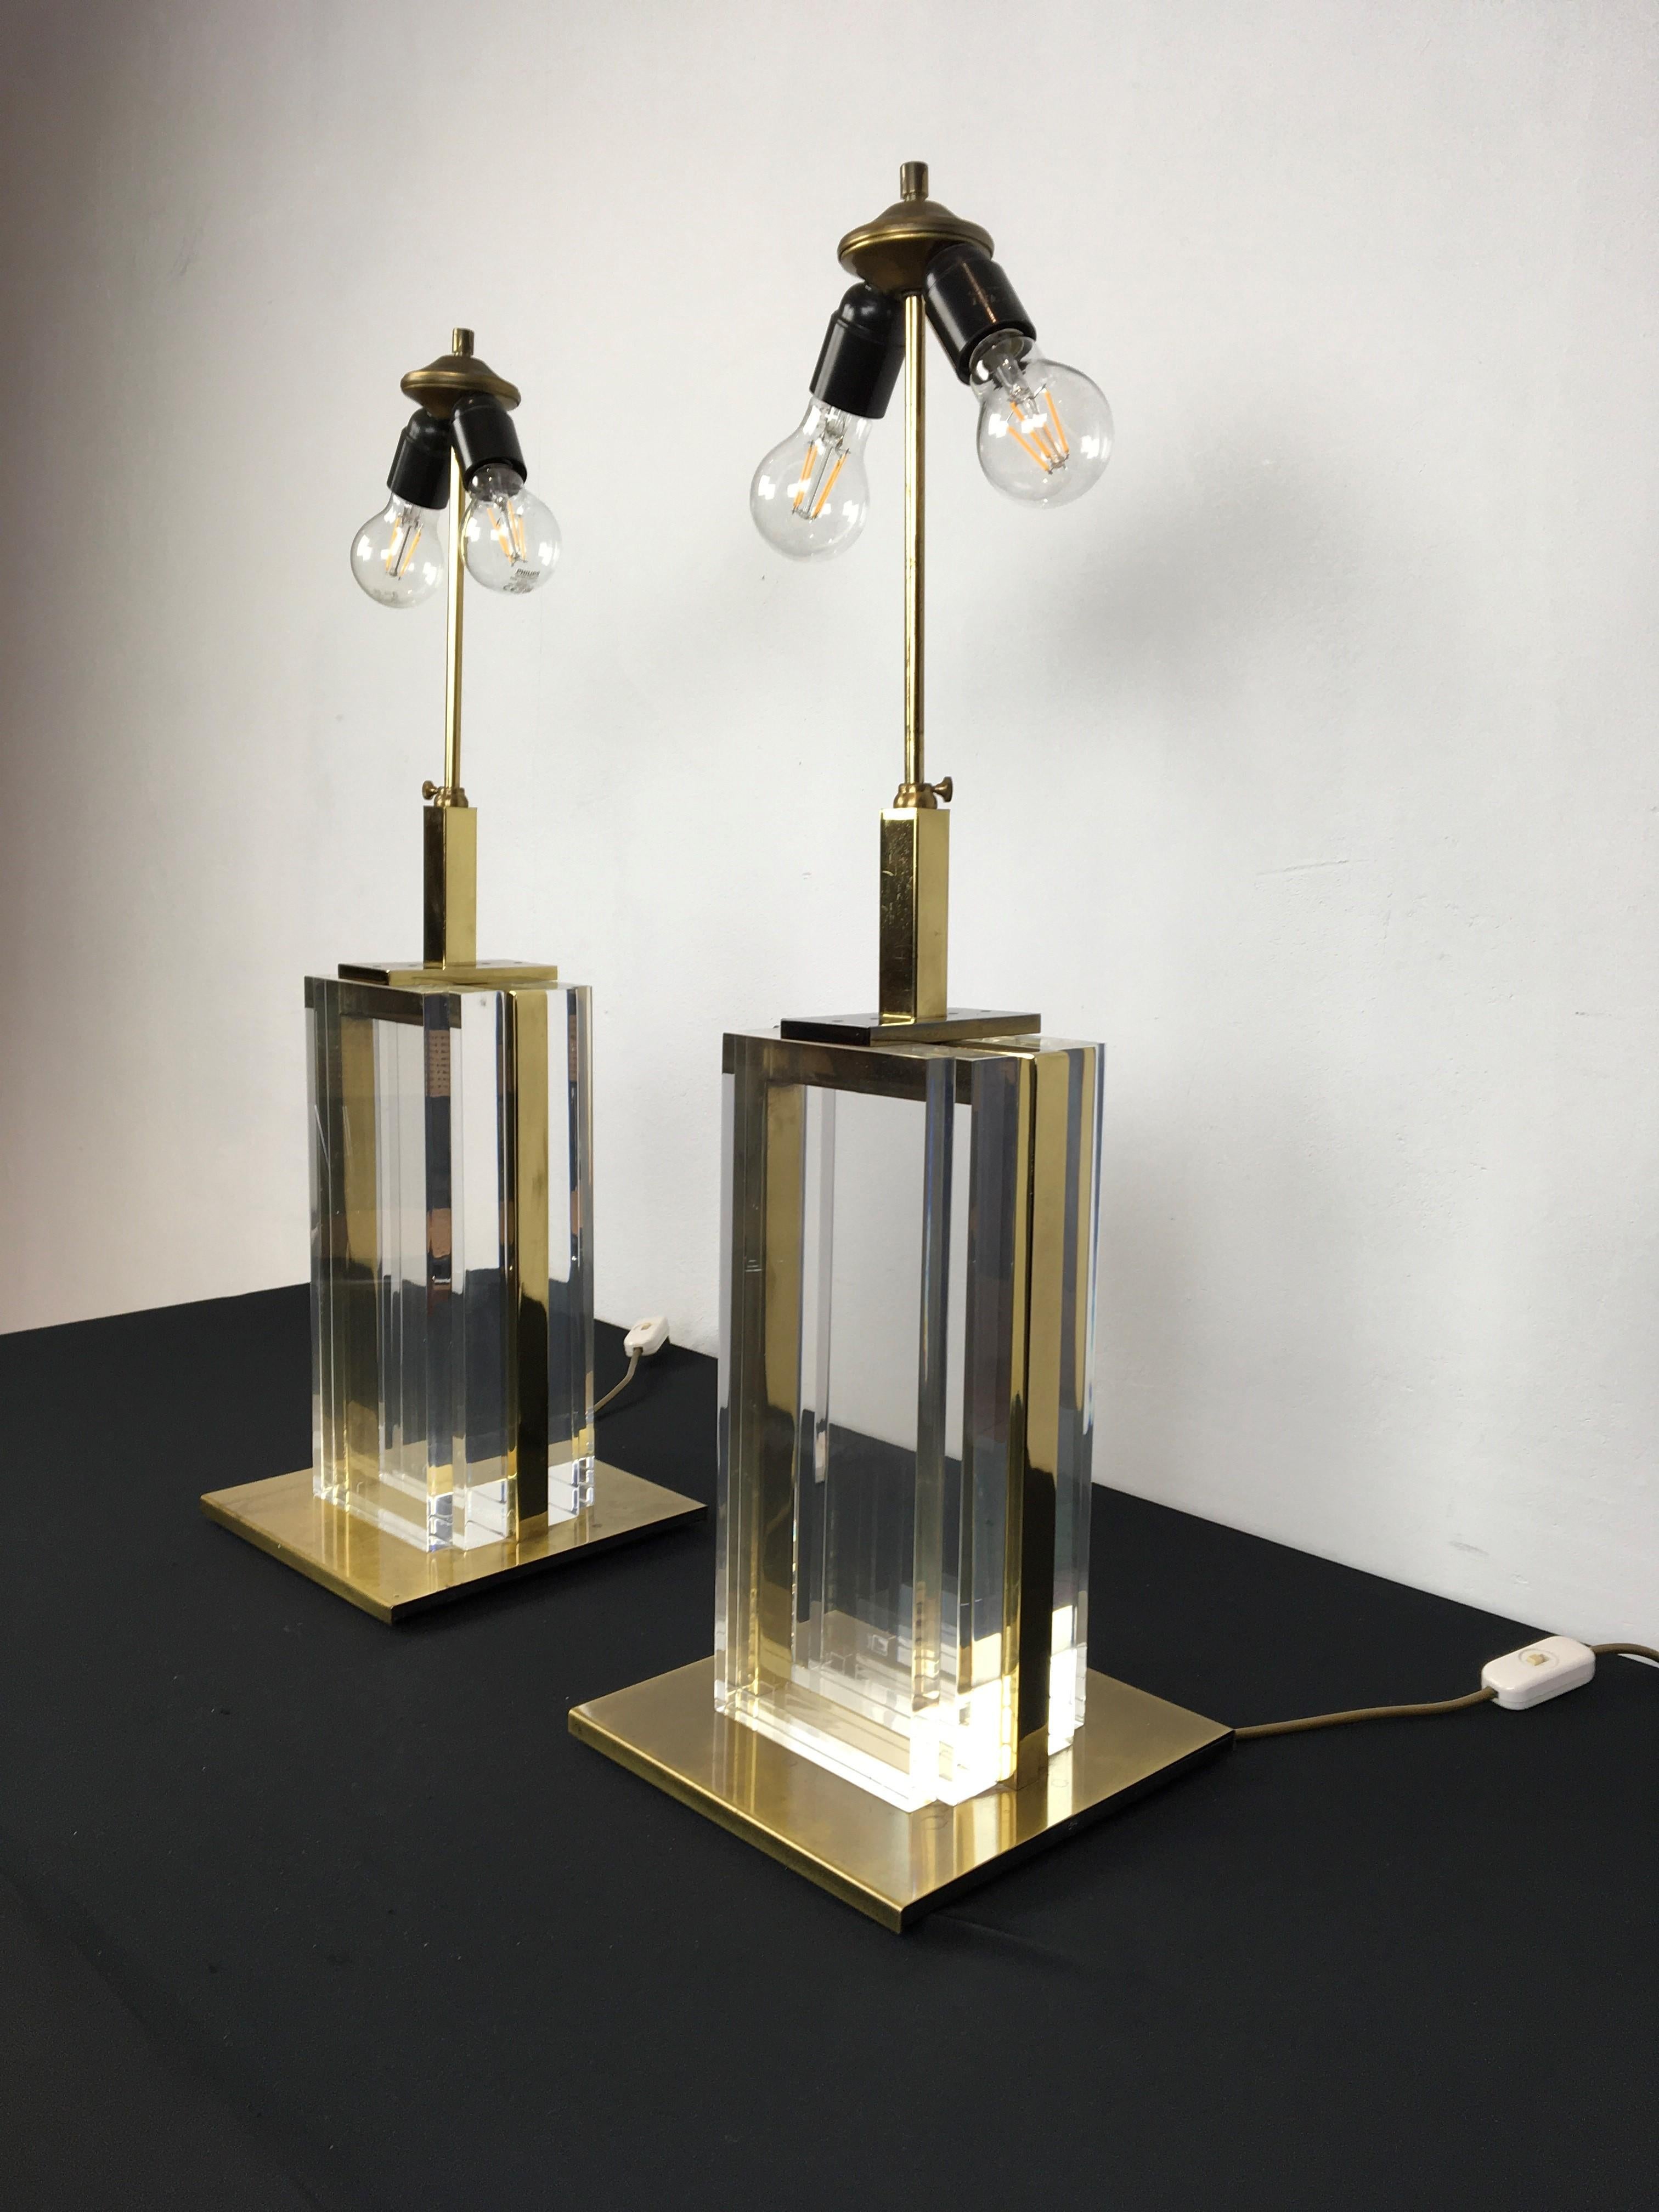 Pair of Belgo Chrome Table Lamps, Lucite and Brass, 1970s In Good Condition For Sale In Antwerp, BE